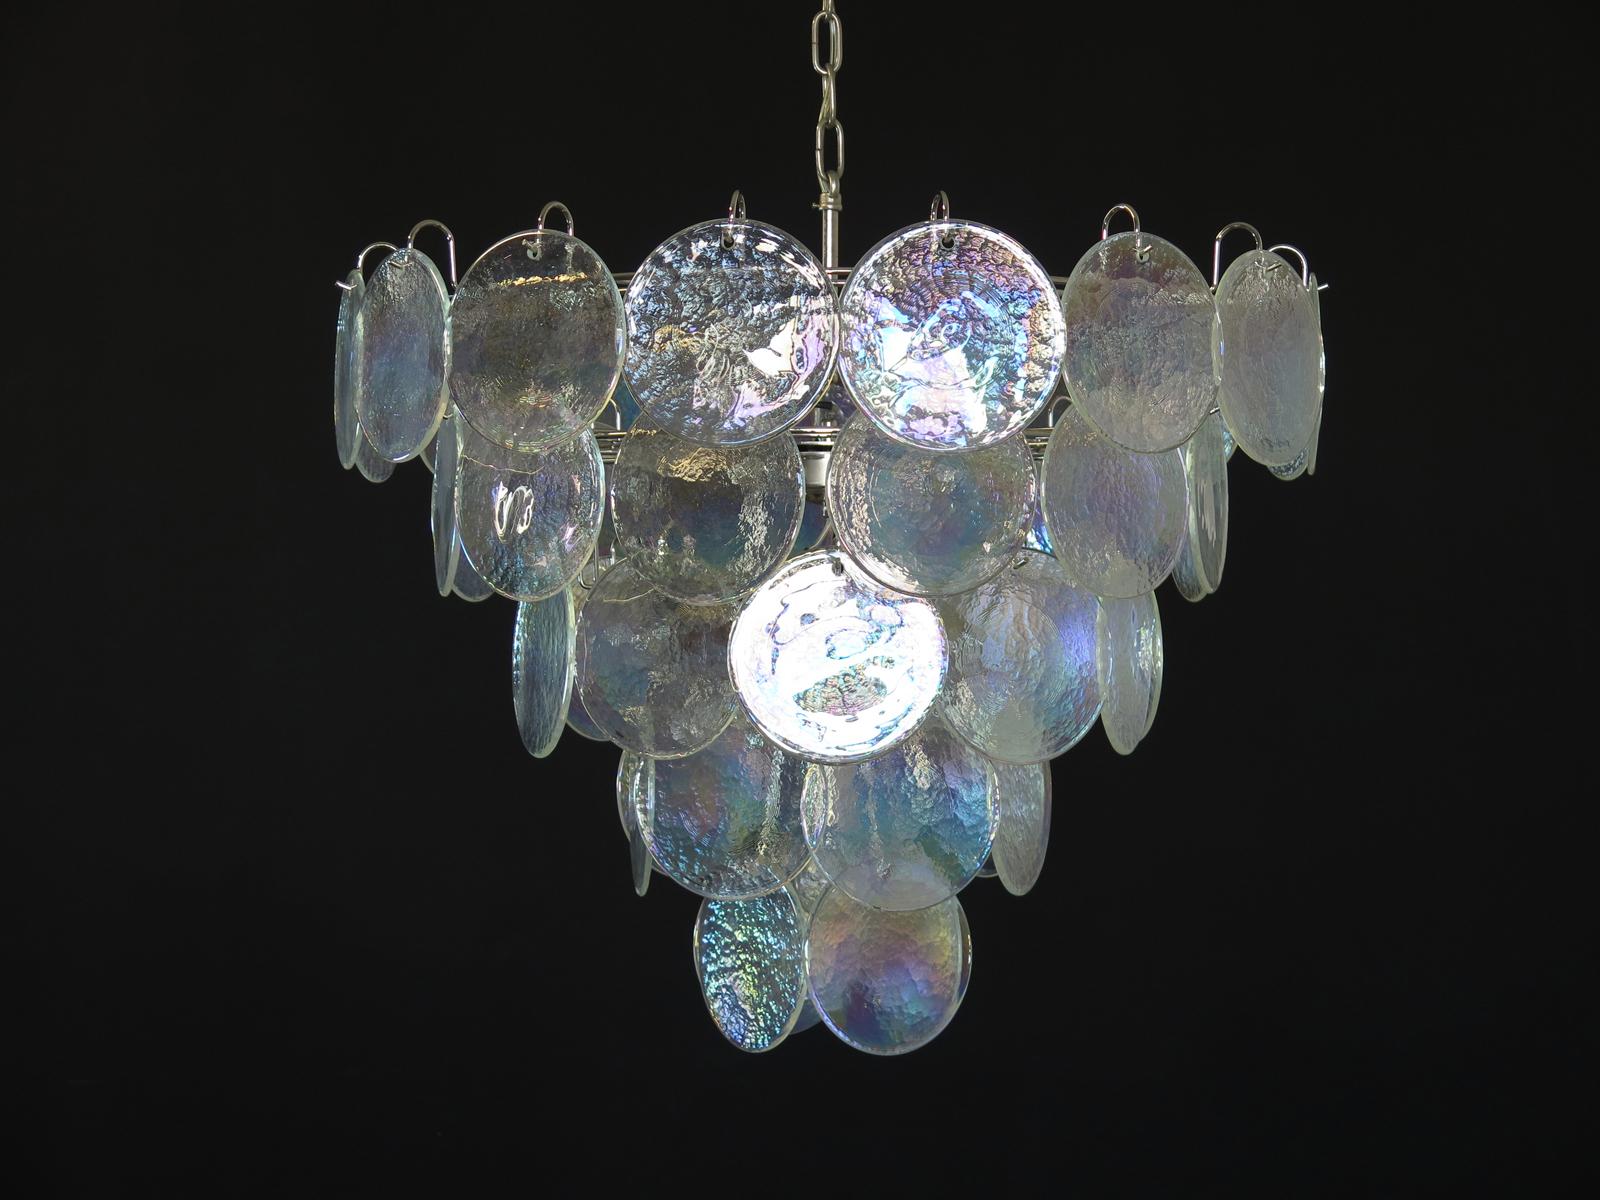 Italian Murano chandelier. The chandelier has 50 Murano iridescent glass disks. The glasses are now unavailable, they have the particularity of reflecting a multiplicity of colors, which makes the chandelier a true work of art. Nickel metal